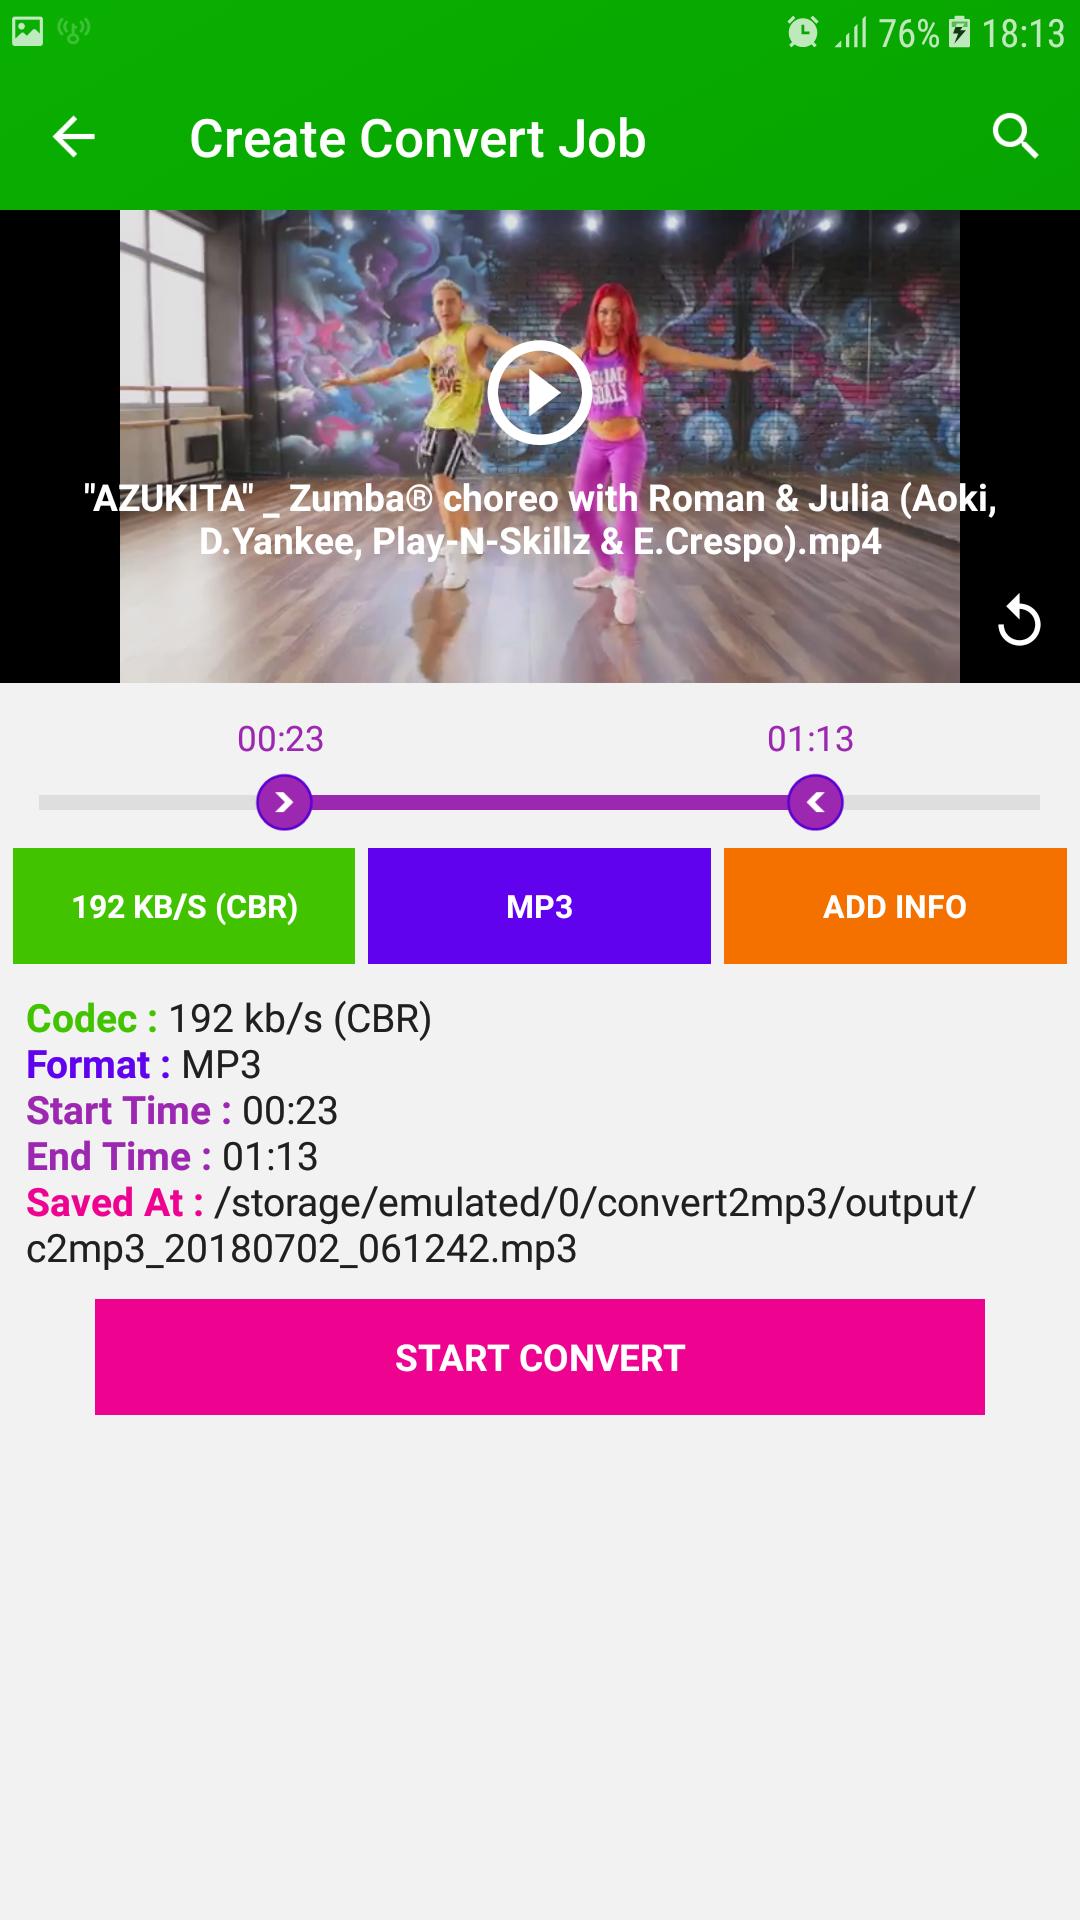 Convert2mp3 - Video to Mp3 Converter mp4 to mp3 for Android - APK Download